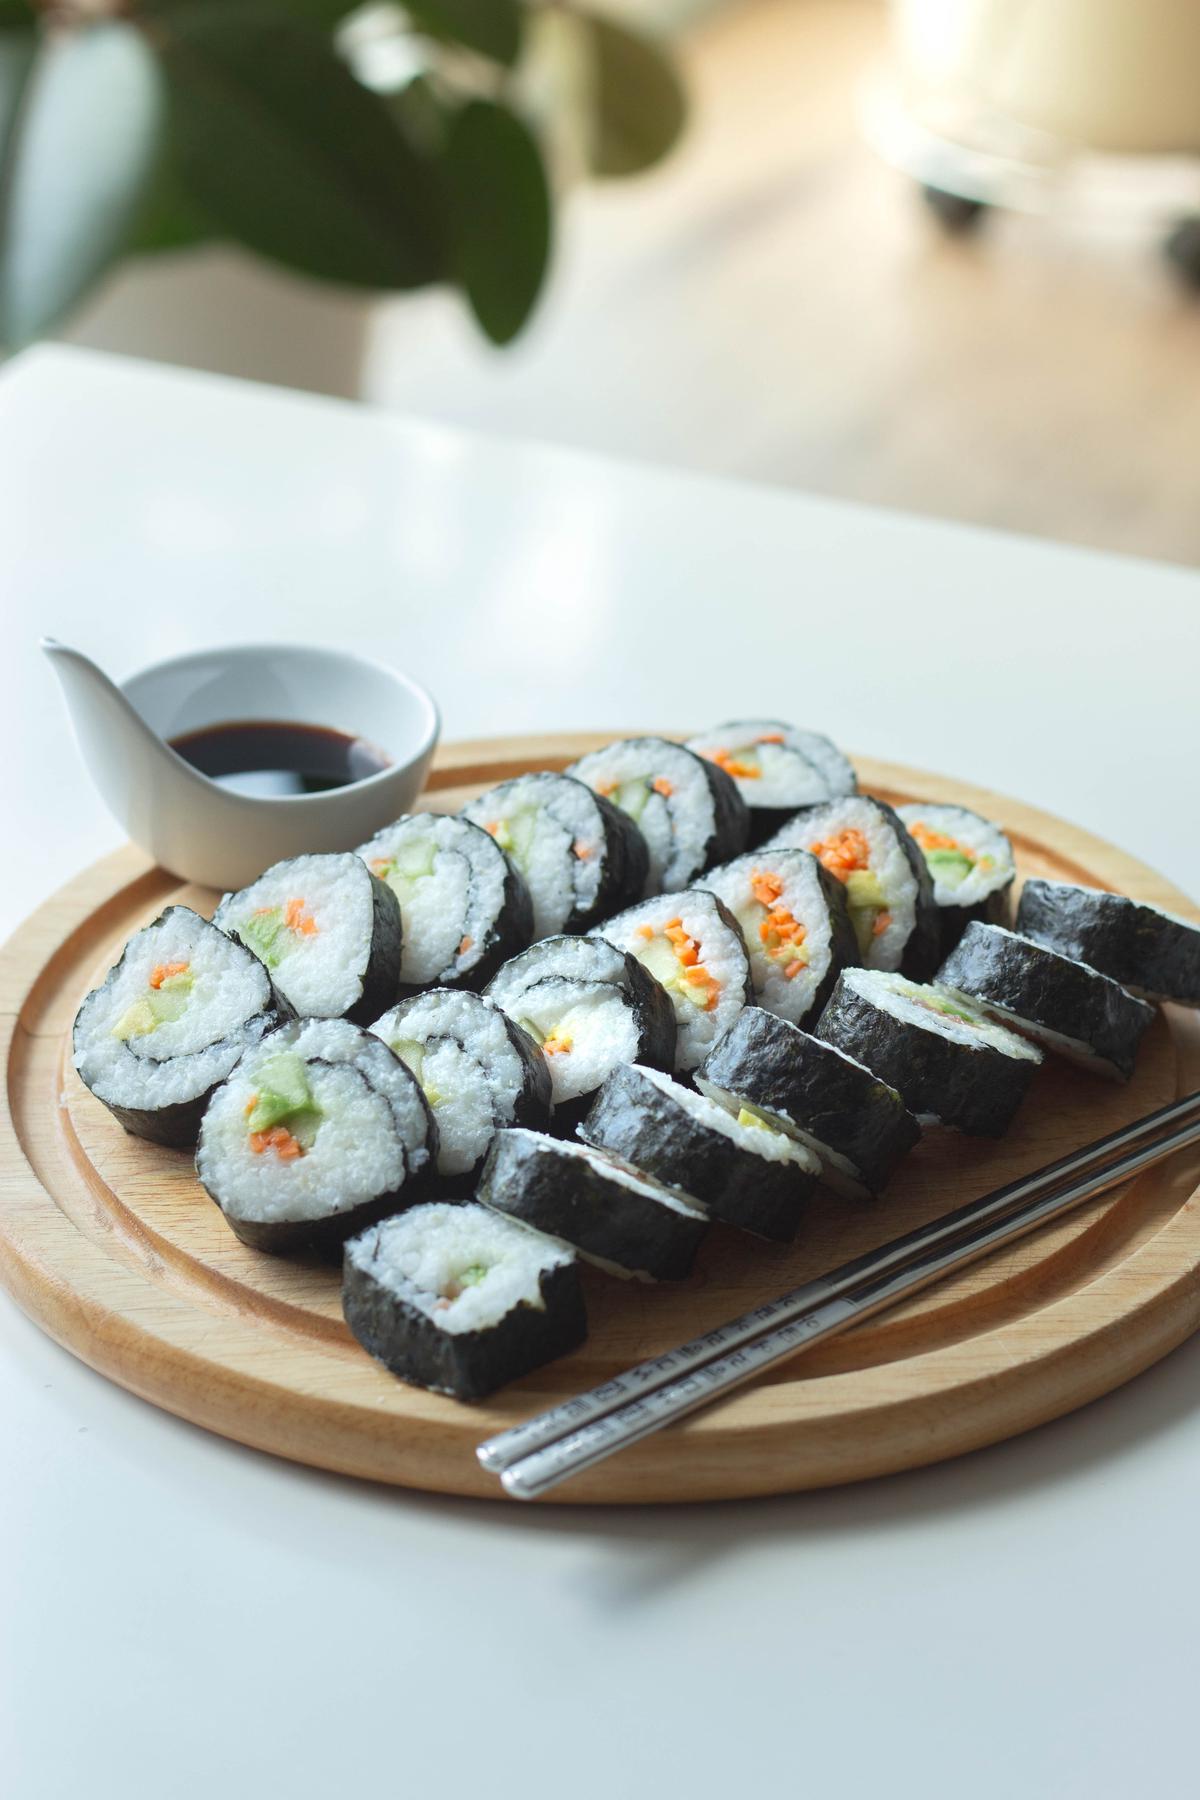 A plate of sushi rolls representing the diverse flavors and variations of sushi that have developed due to globalization